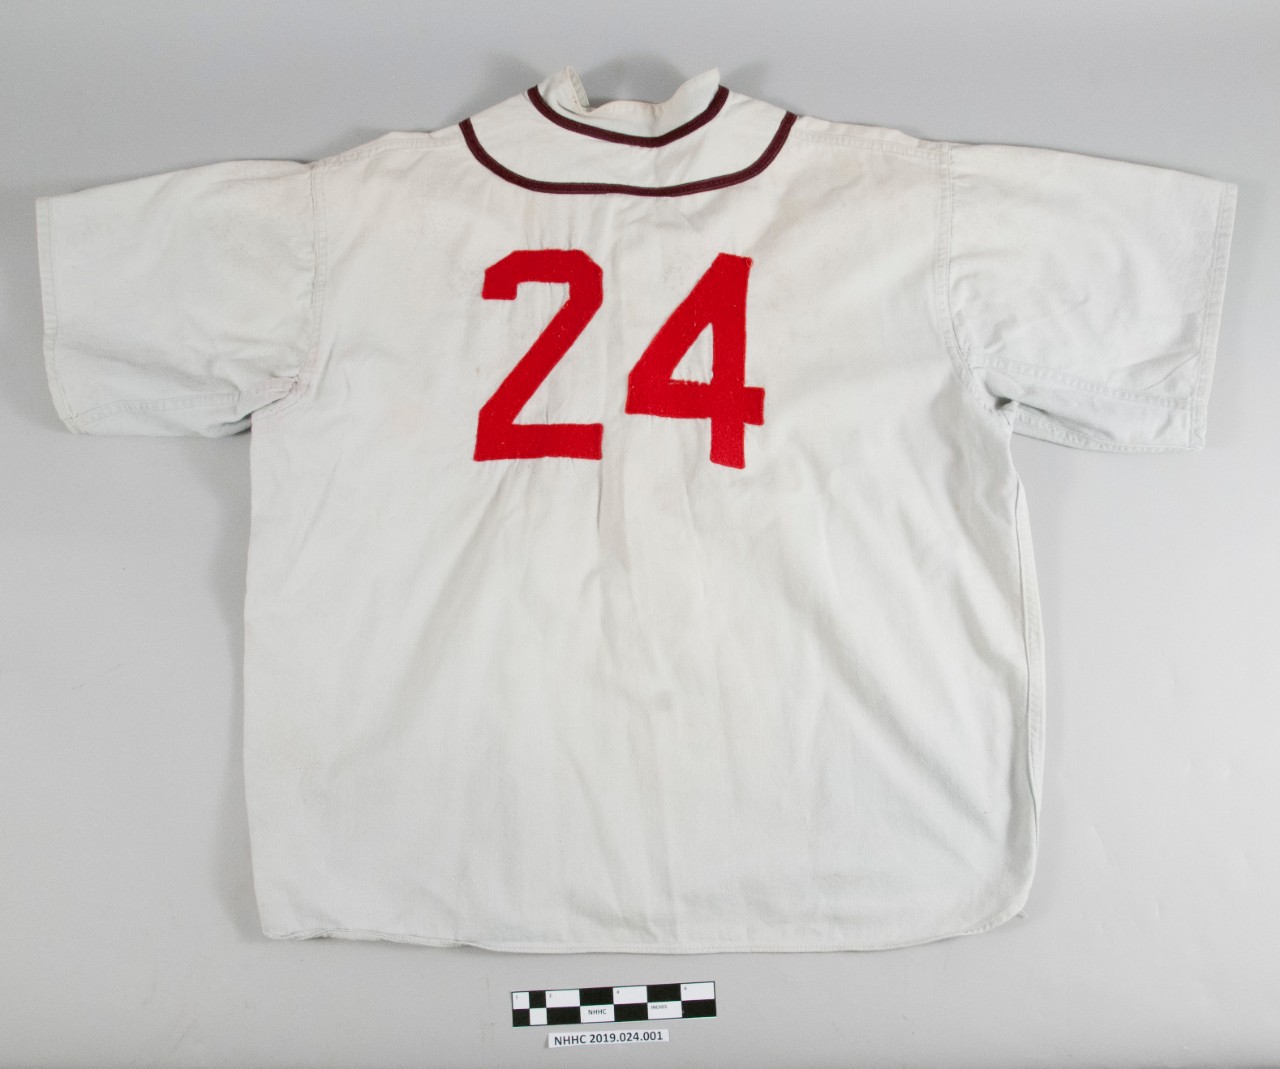 Reverse view of the baseball uniform blouse. Off-white in color with red lettering 24. Two brown stripes around the collar.